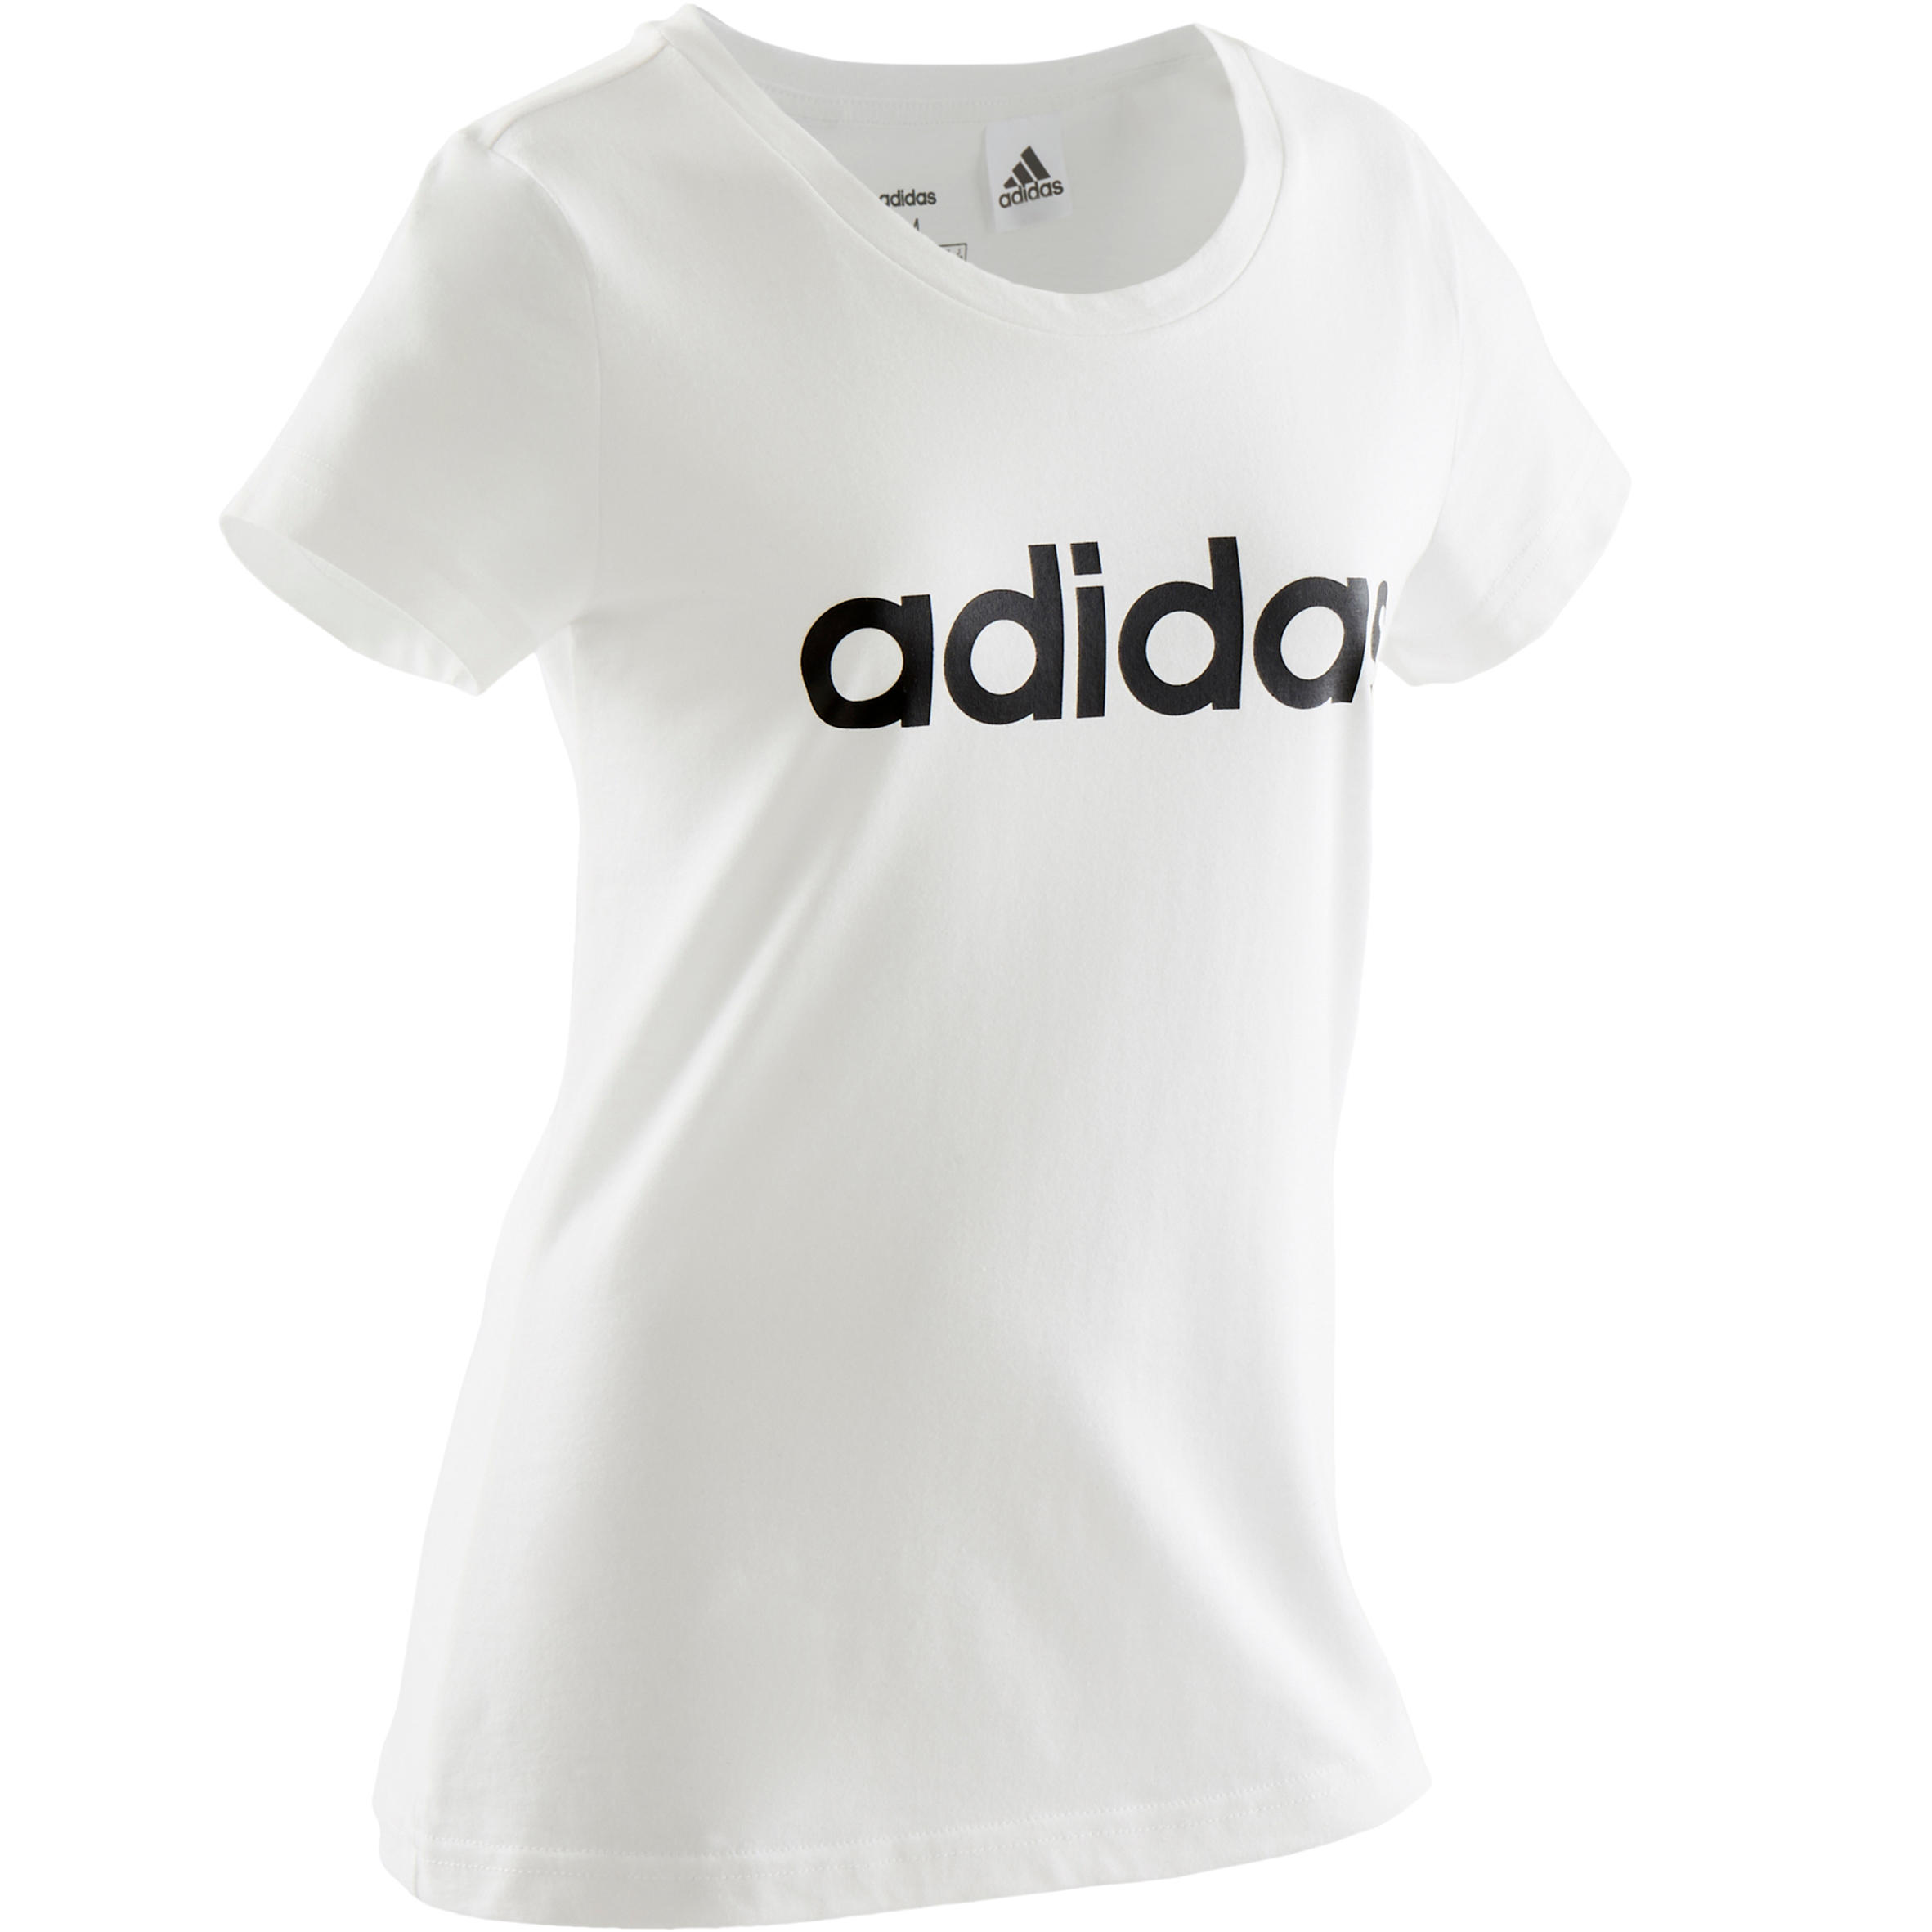 Girls' T-Shirt - White with Contrasting 